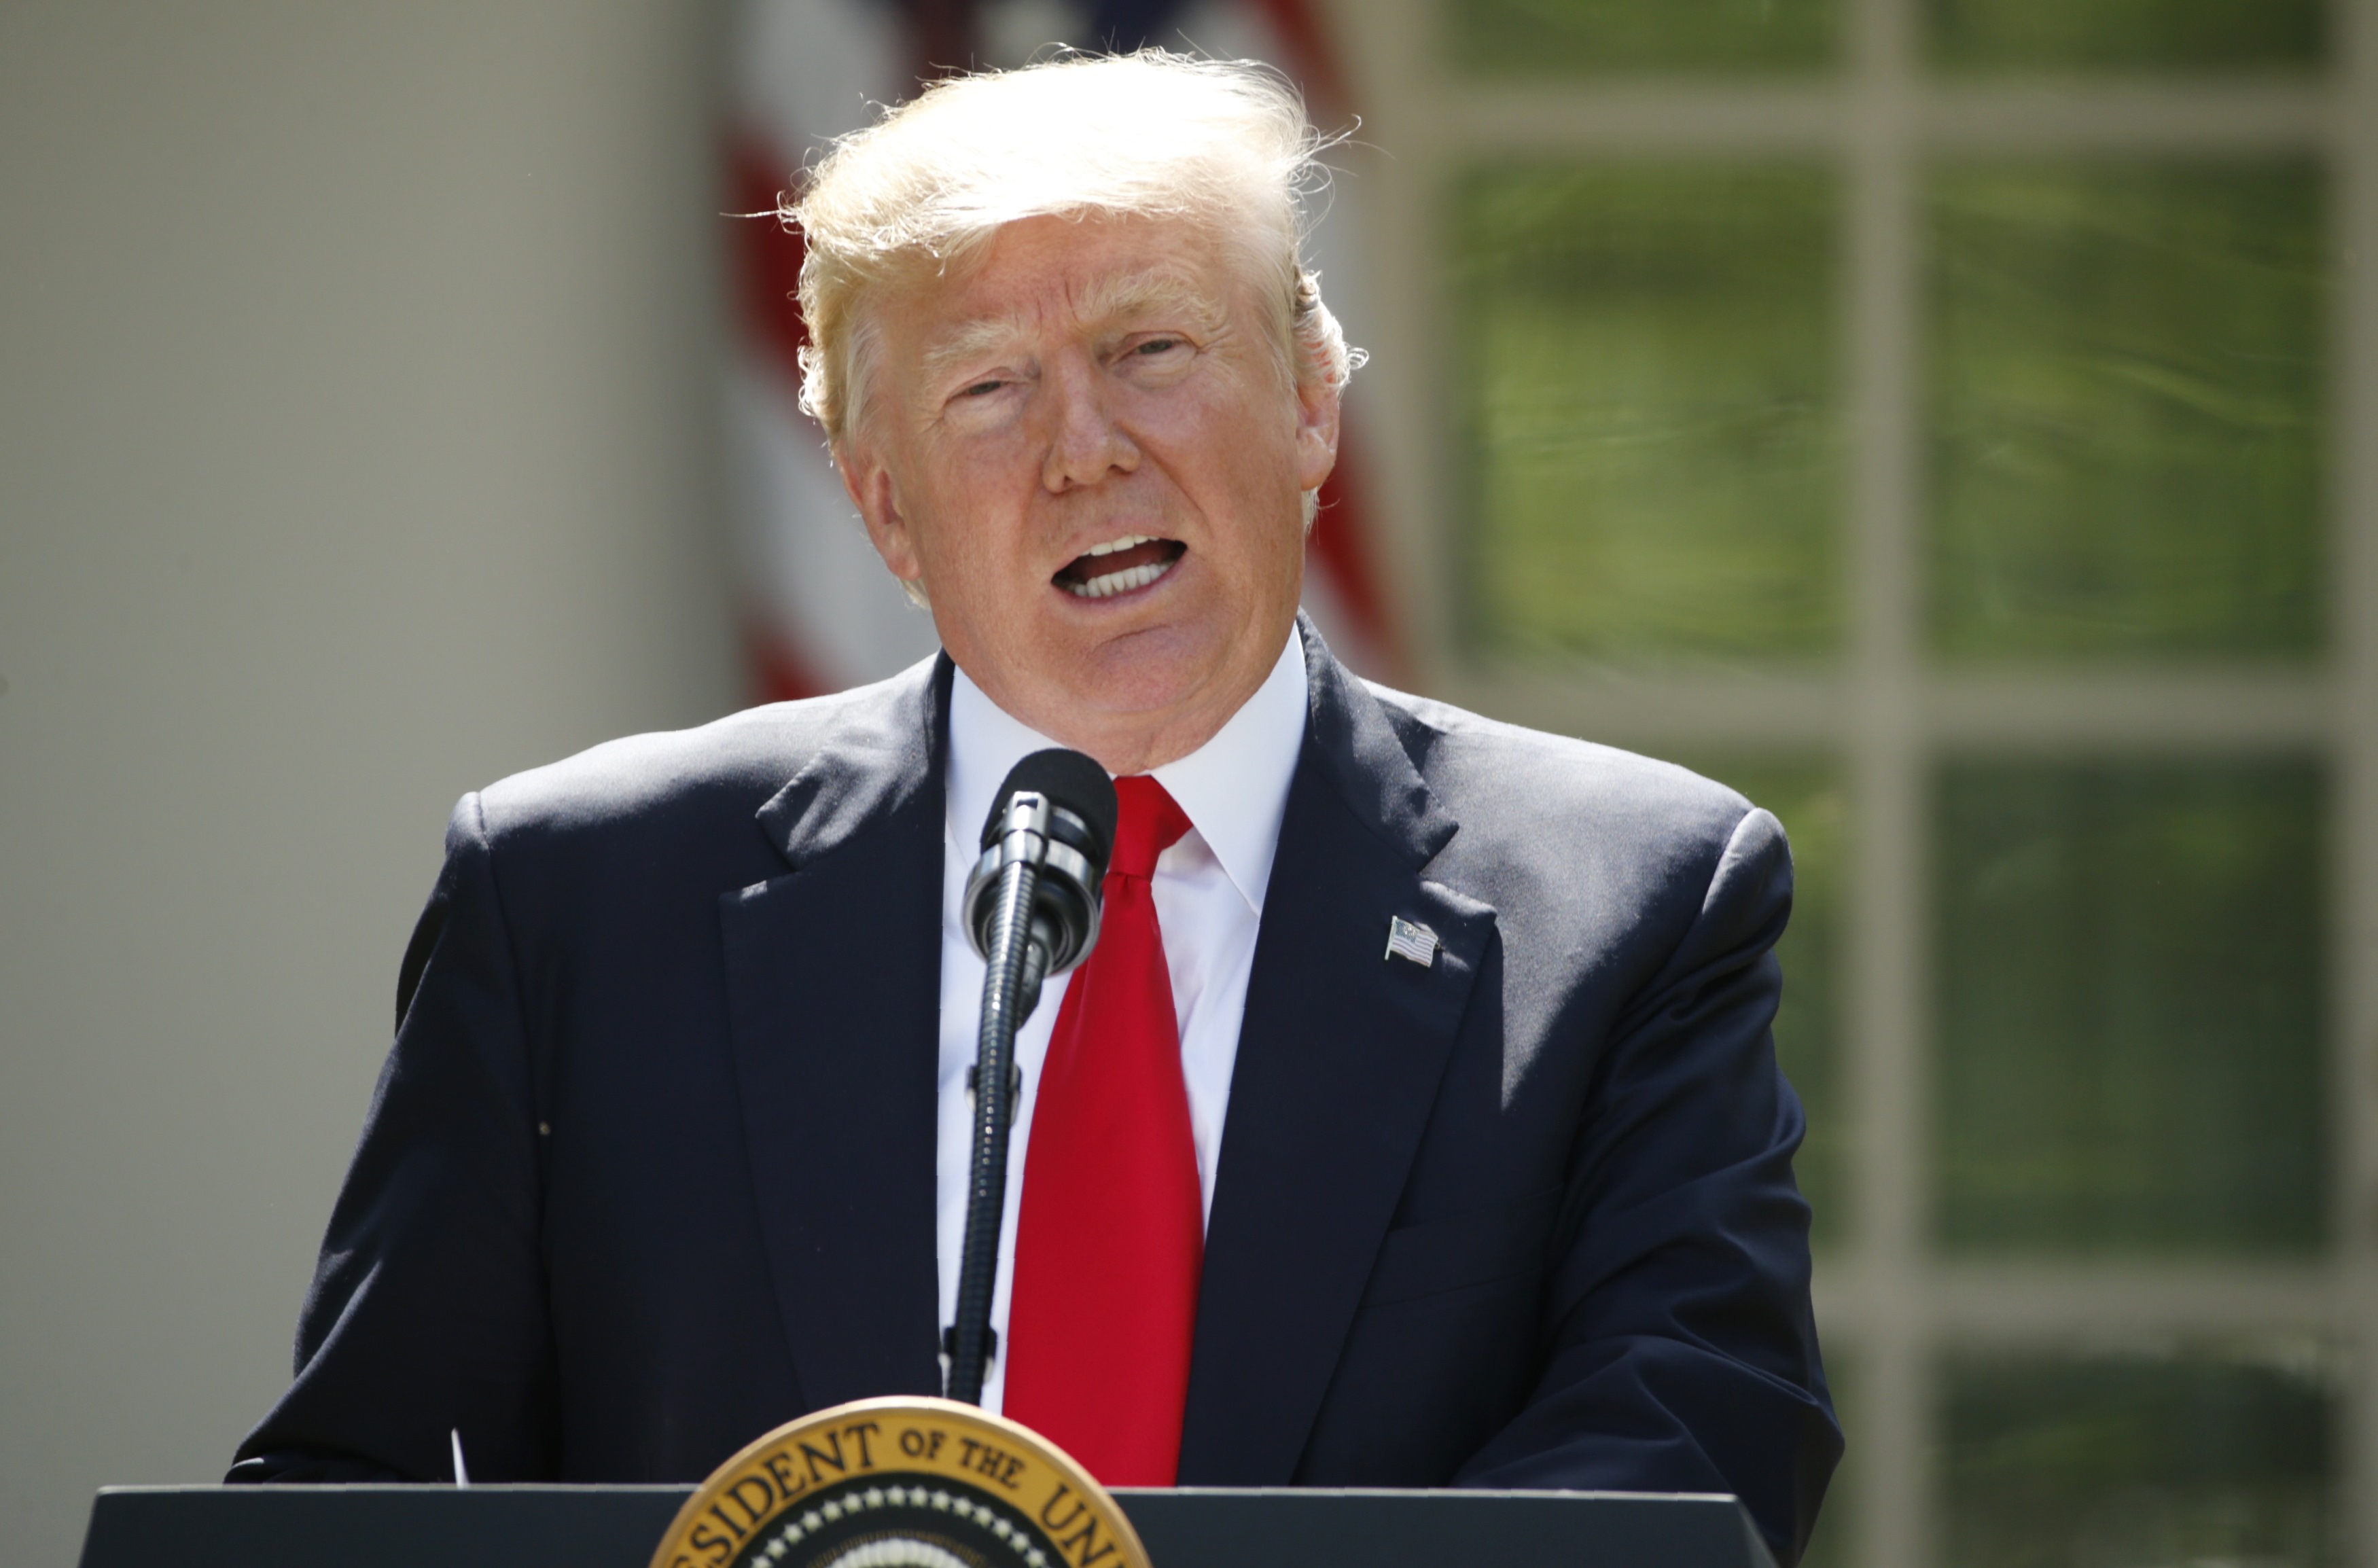 President Donald Trump announces his decision that the United States will withdraw from the landmark Paris Climate Agreement, in the Rose Garden of the White House in Washington on June 1, 2017. (REUTERS/Kevin Lamarque)